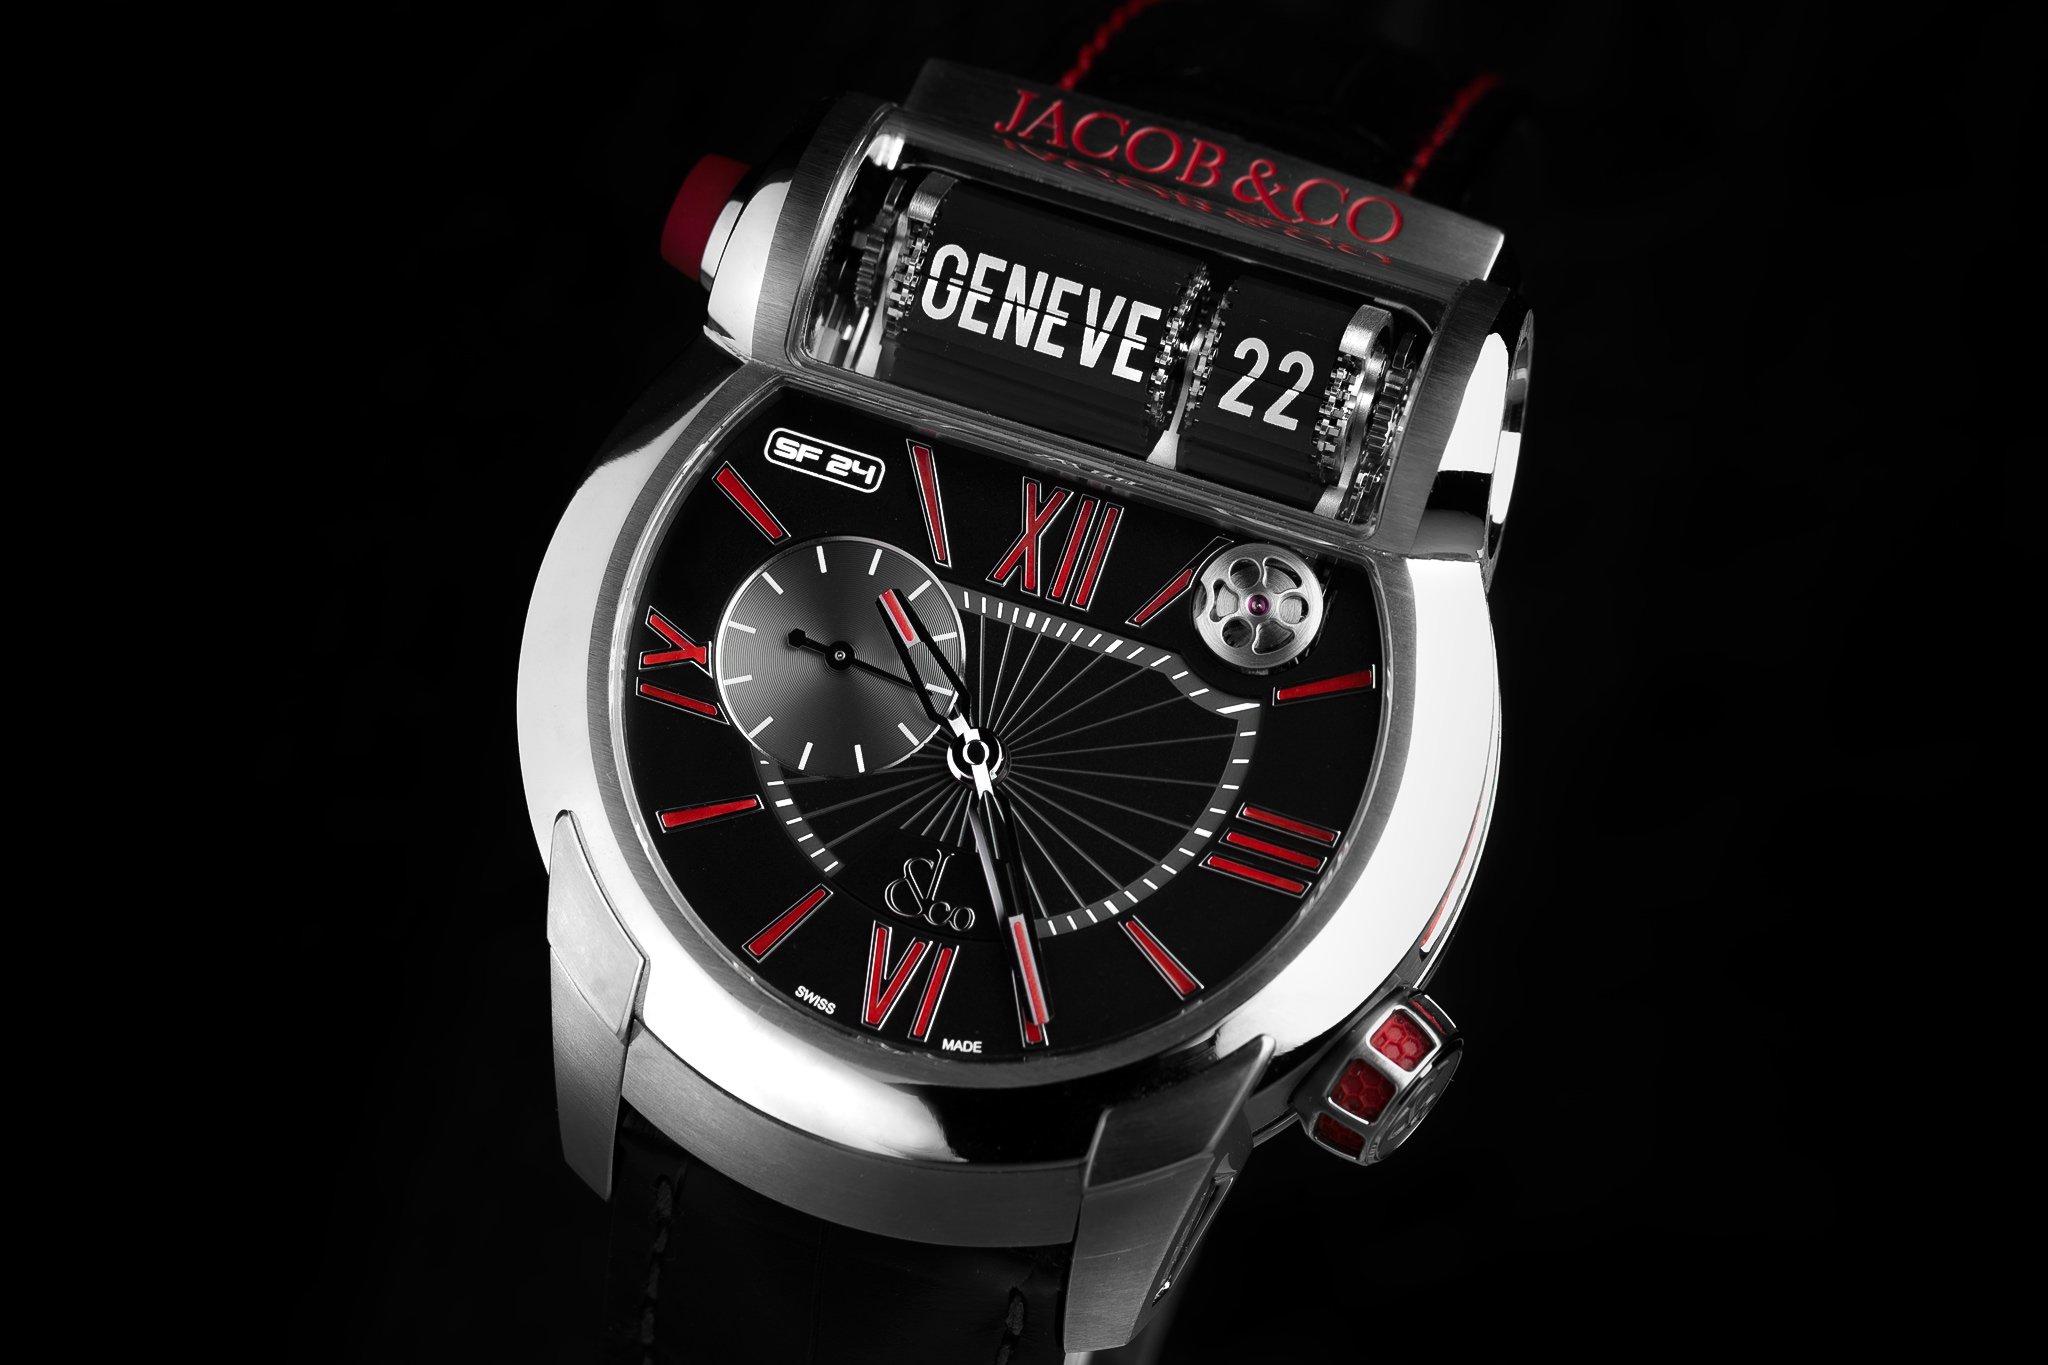 Jacob & Co Epic SF24 Only Watch 2015